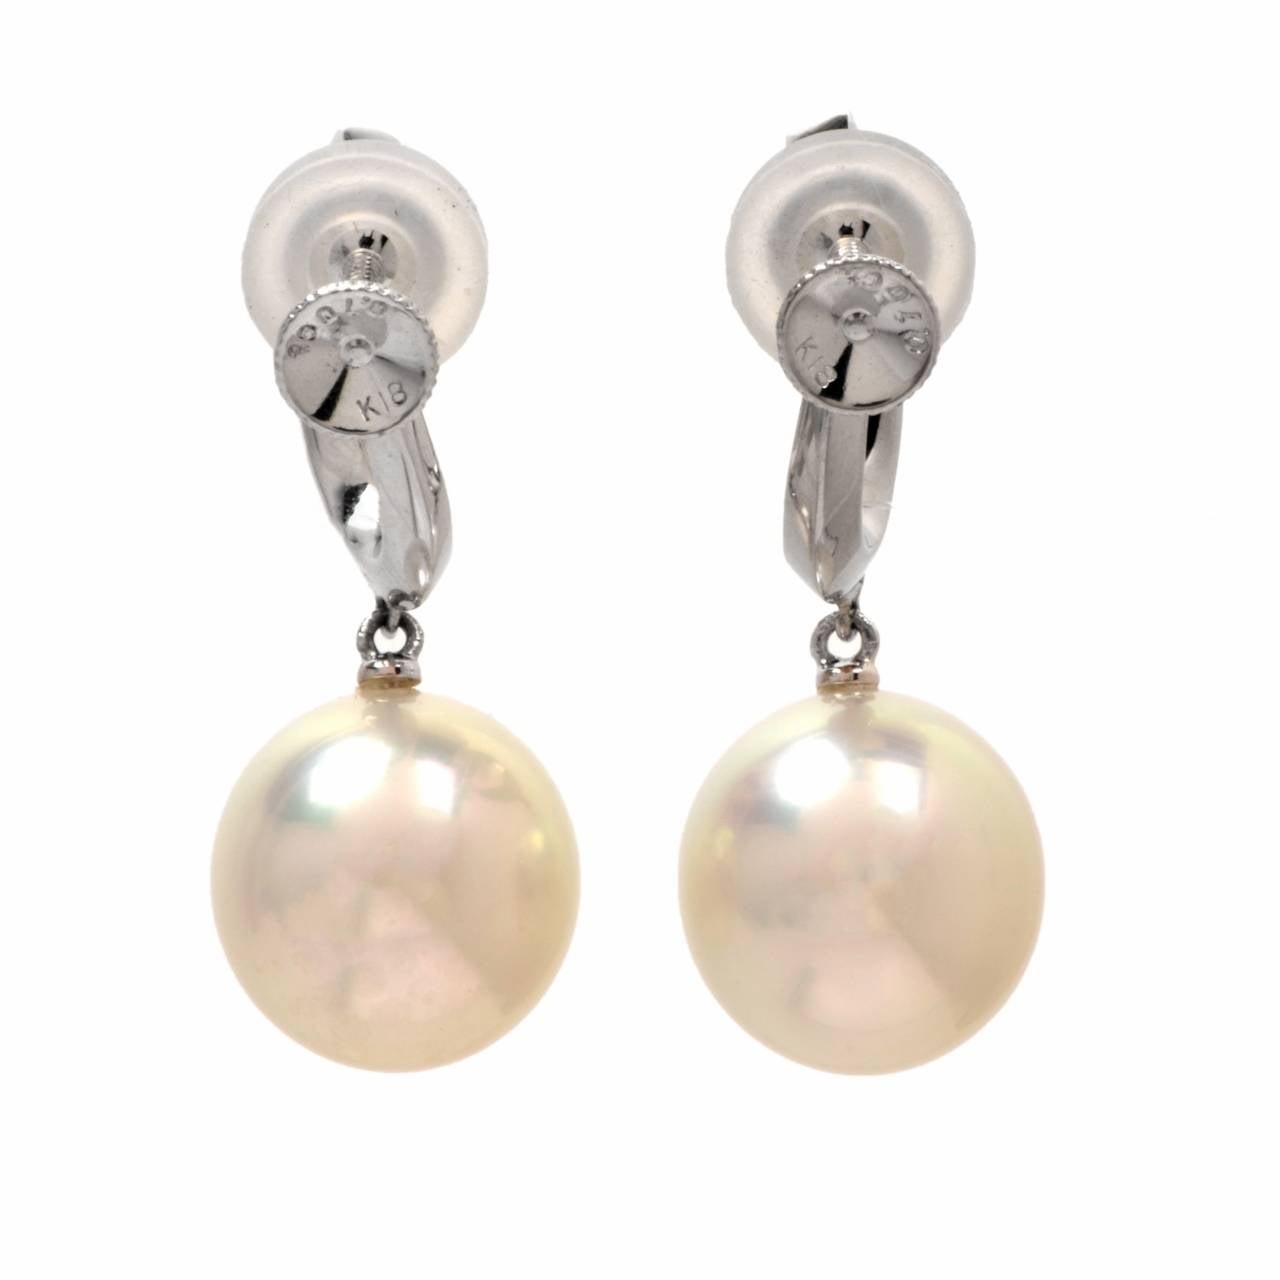 These gorgeous drop dangle earrings are crafted in solid 18K white gold. Sophisticated in every way, these earrings feature 16 genuine round cut dazzling diamonds approx: 0.35 cttw, G-H color, VS clarity, prong set and 2 genuine lustrous 11mm